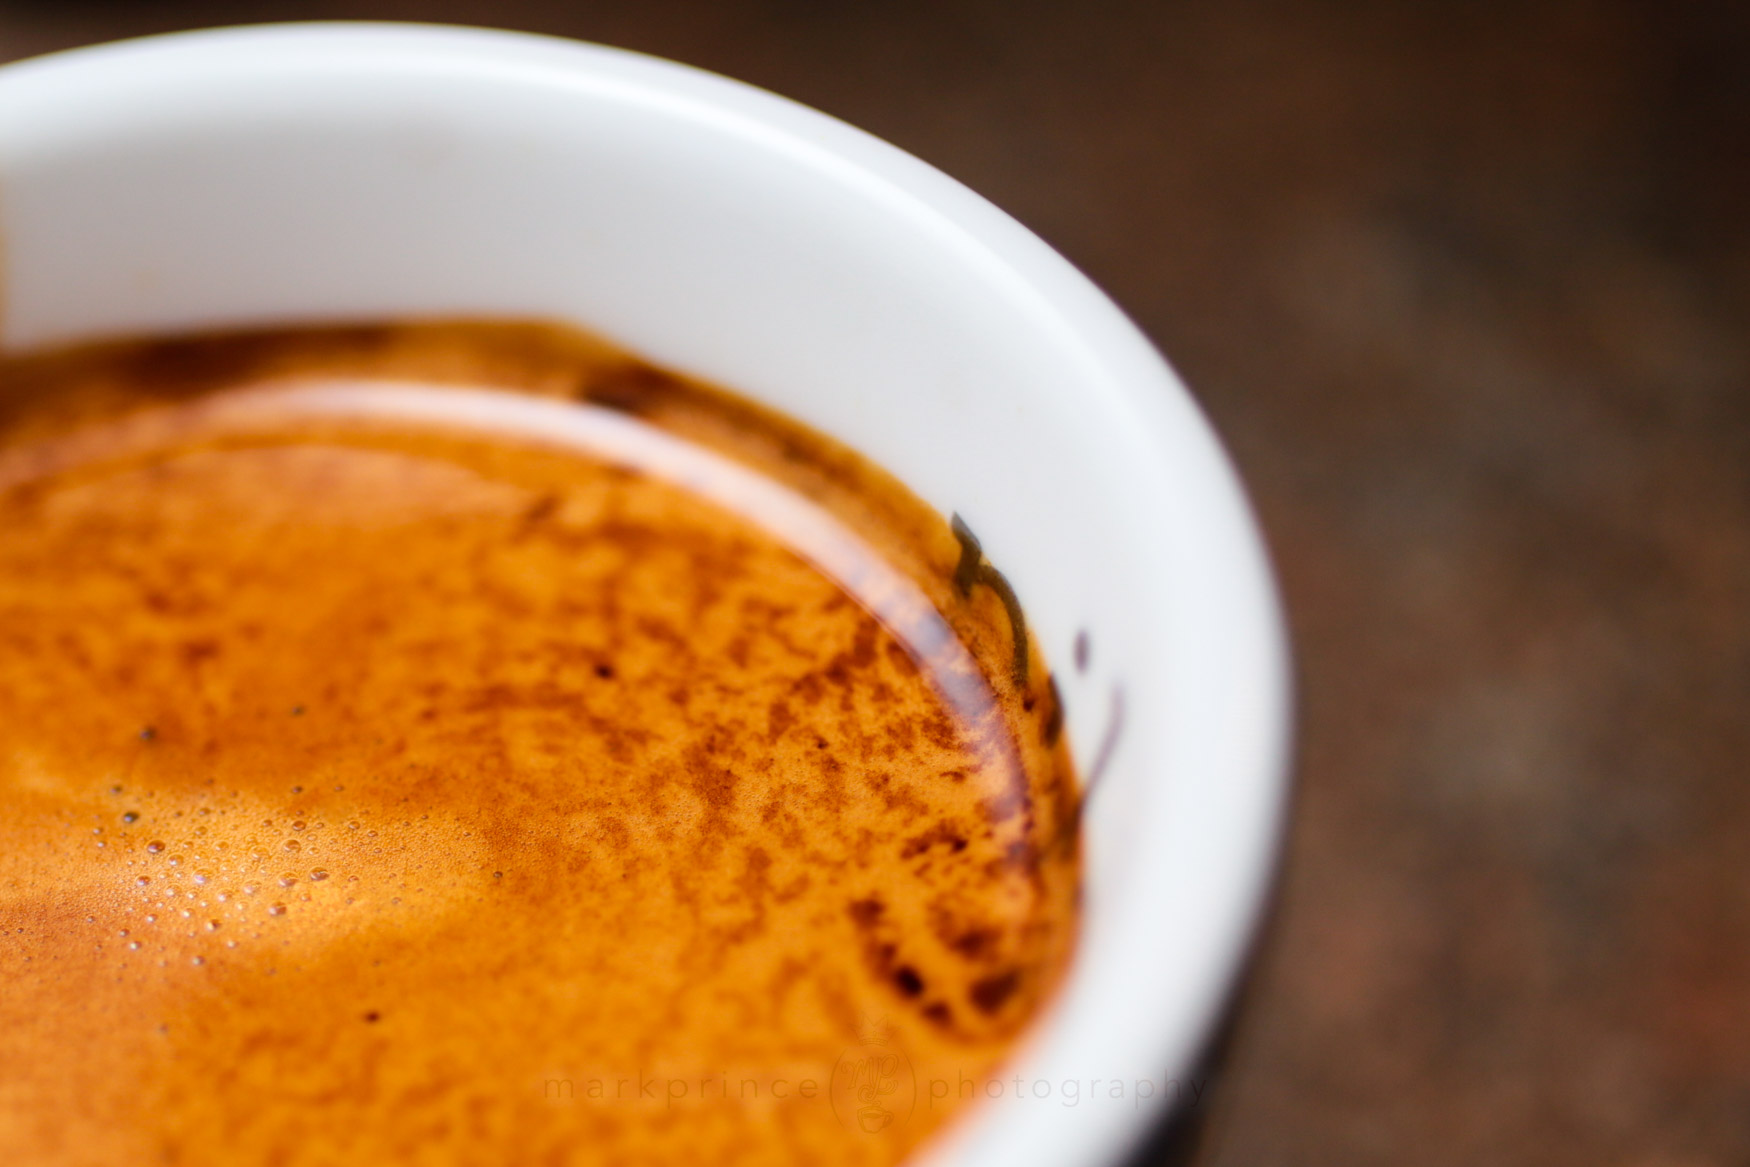 How to pull a perfect shot of espresso - Perfect Daily Grind